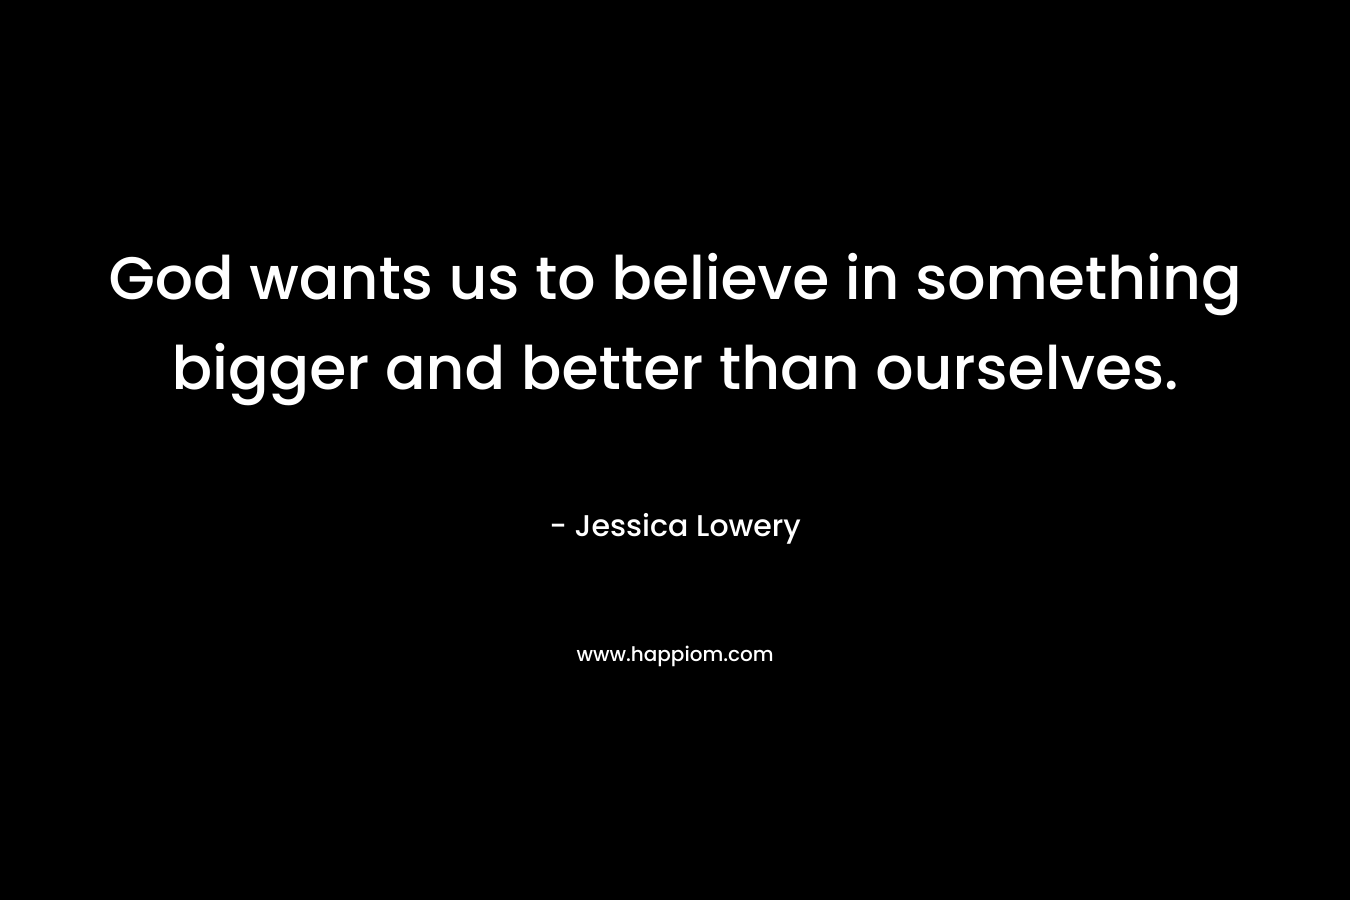 God wants us to believe in something bigger and better than ourselves. – Jessica Lowery